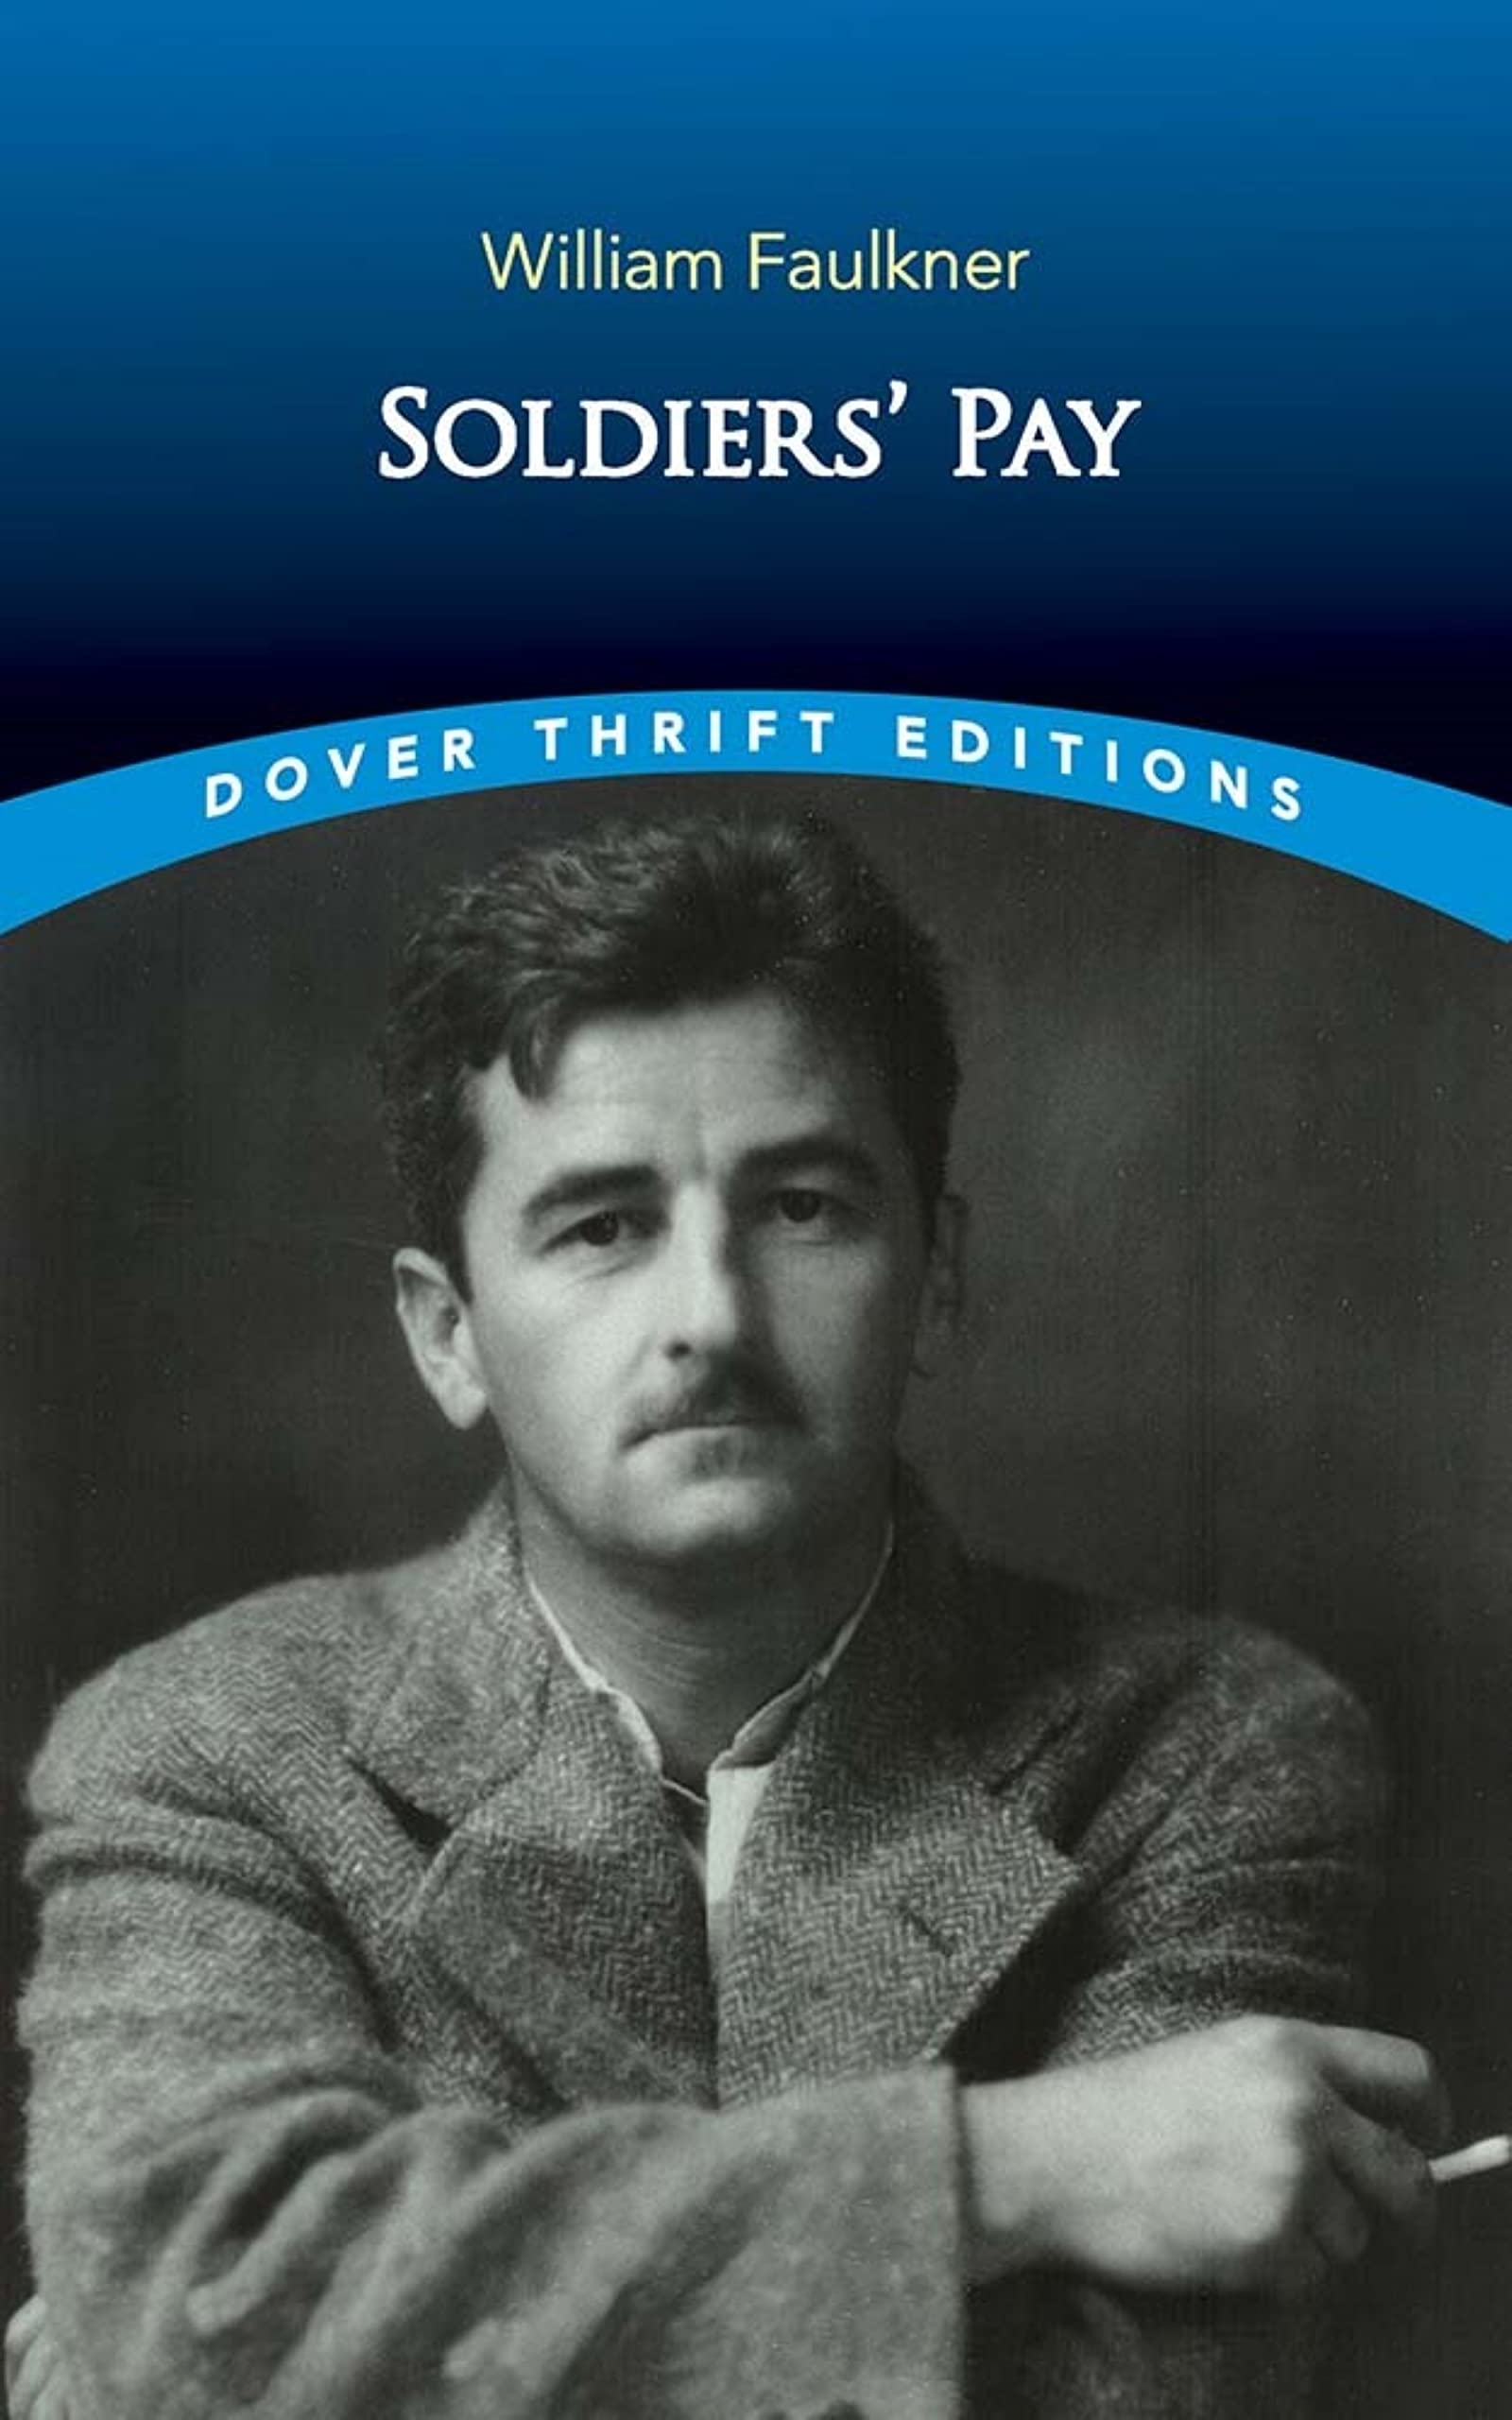 Soldiers' Pay ( Dover Thrift Editions ) - SureShot Books Publishing LLC